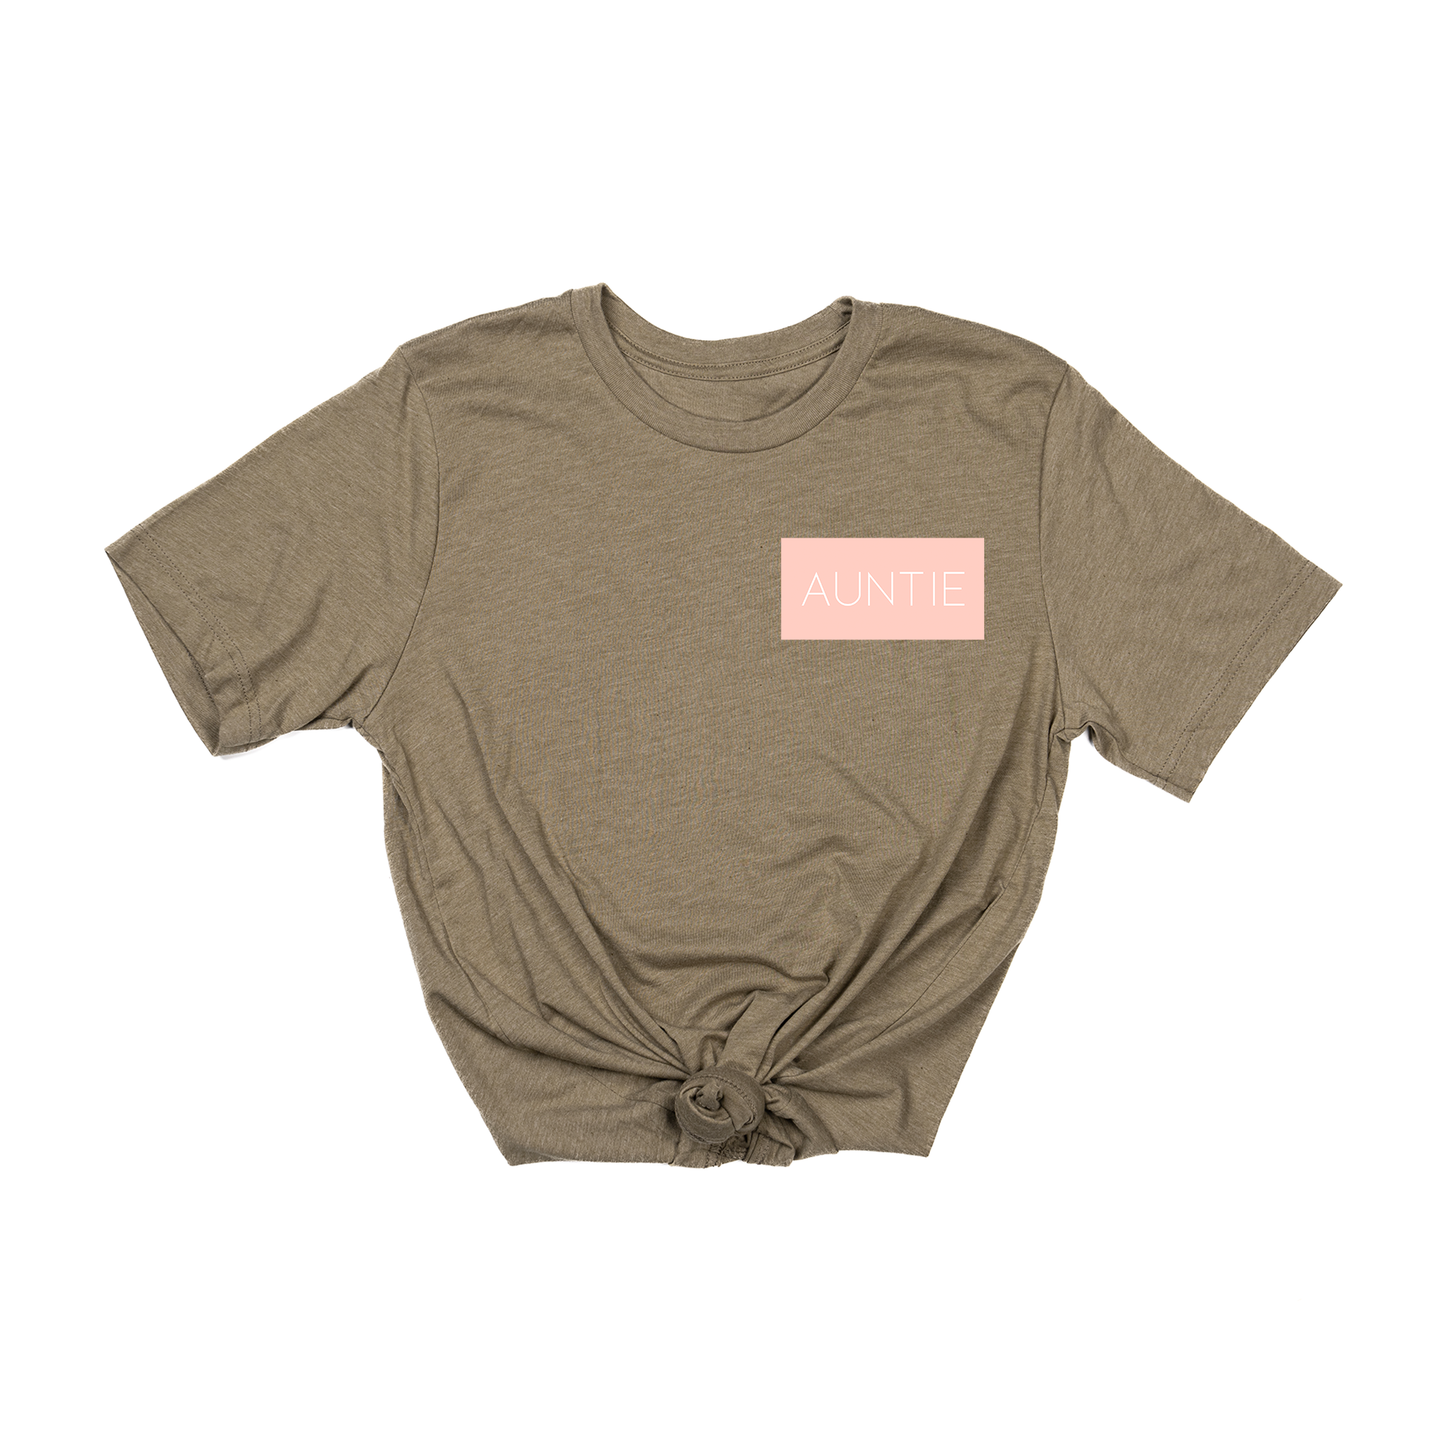 Auntie (Boxed Collection, Pocket, Ballerina Pink Box/White Text) - Tee (Olive)